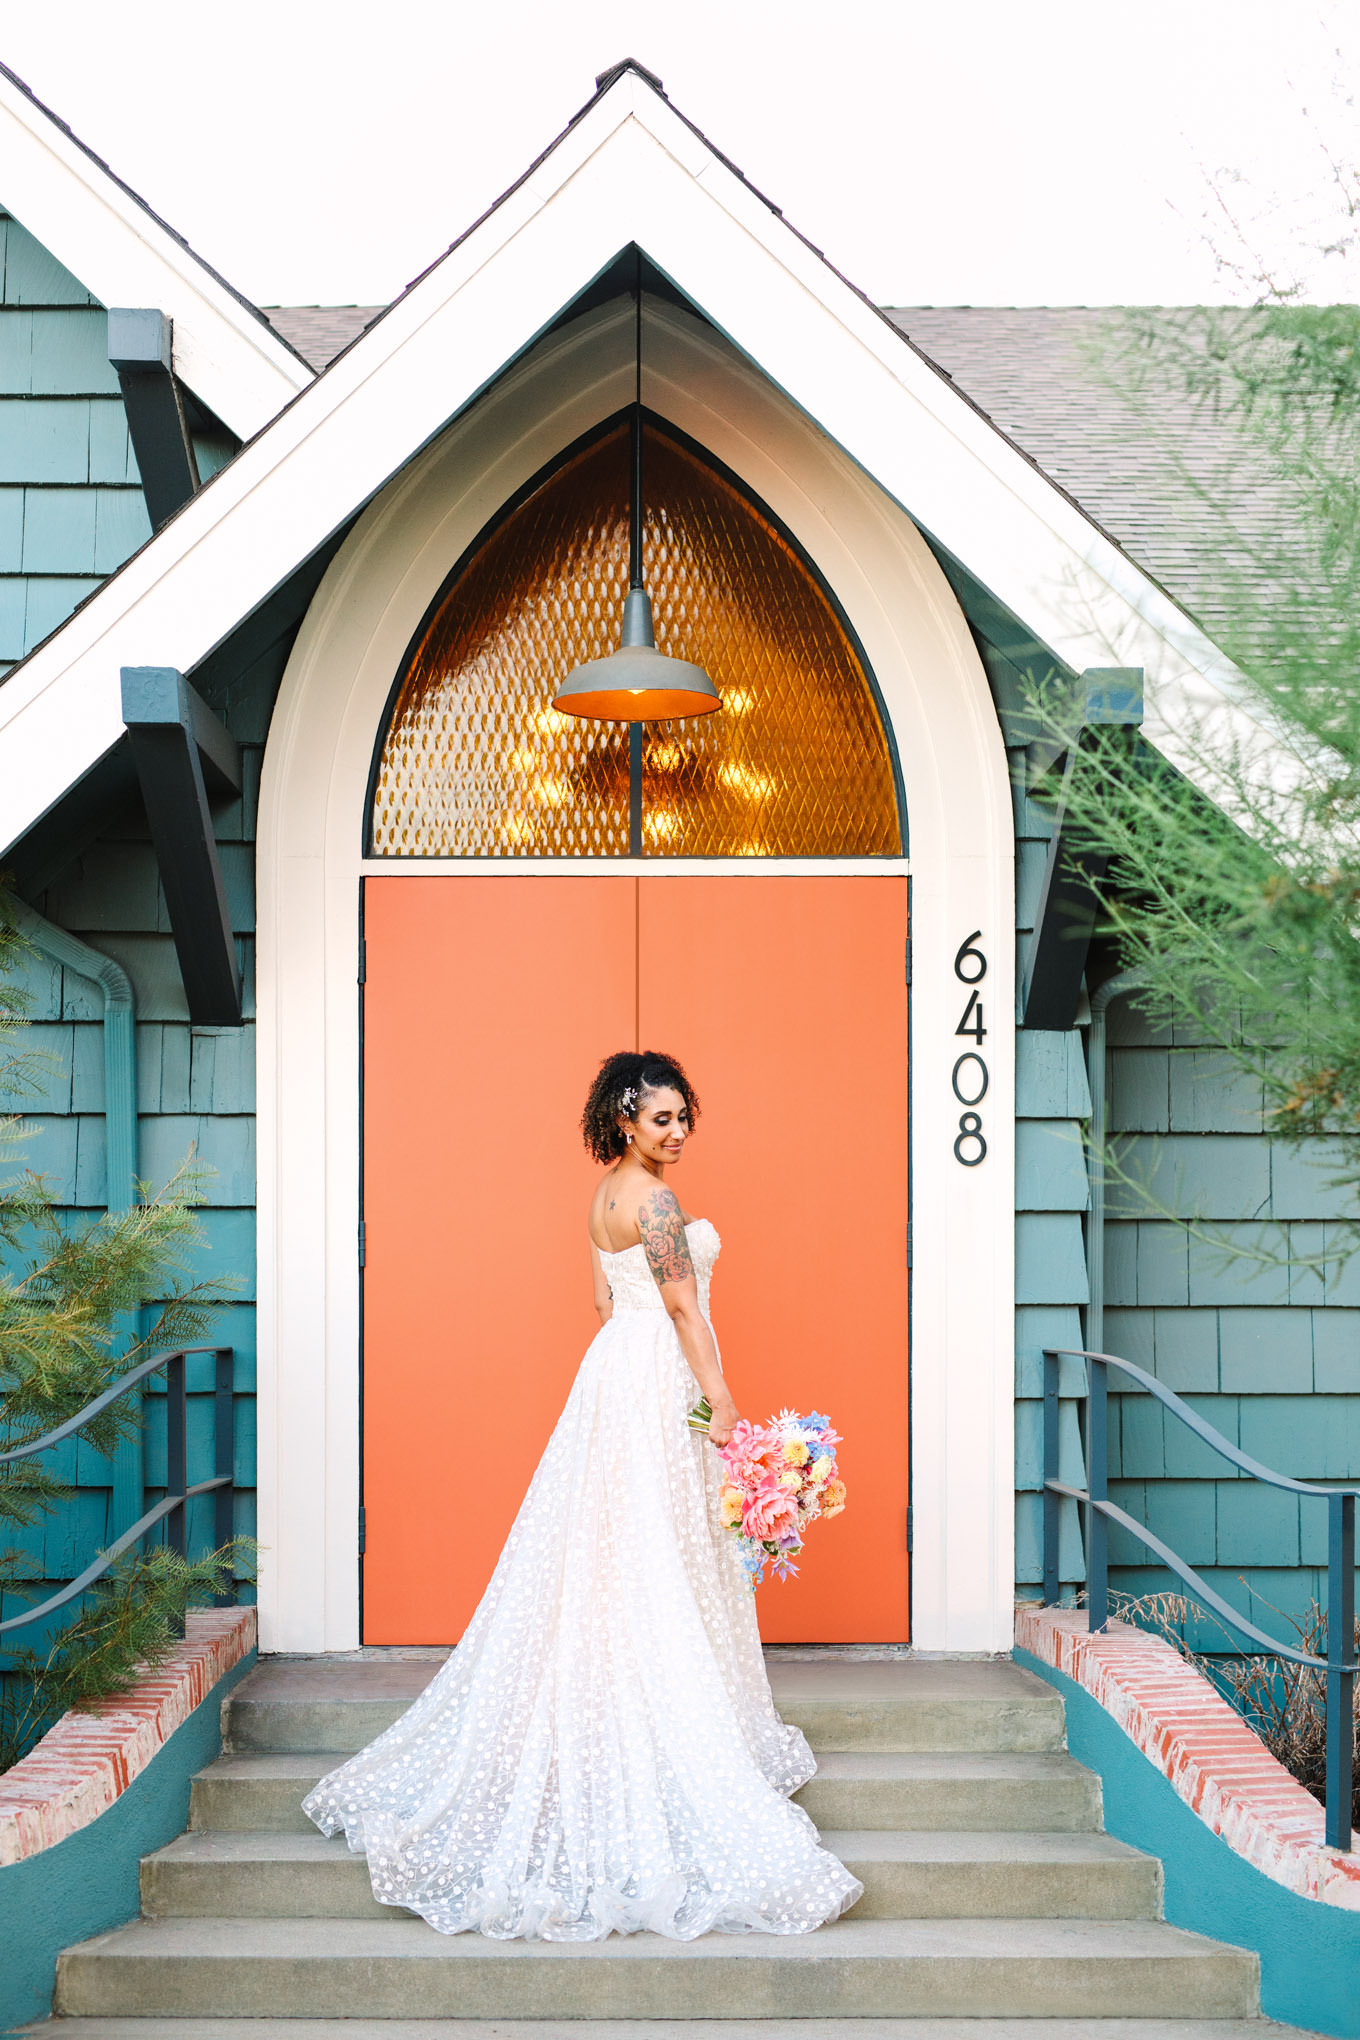 Bridal portrait in front of Ruby Street door Los Angeles Chinatown engagement session | Engagement, elopement, and wedding photography roundup of Mary Costa’s favorite images from 2020 | Colorful and elevated photography for fun-loving couples in Southern California | #2020wedding #elopement #weddingphoto #weddingphotography #microwedding   Source: Mary Costa Photography | Los Angeles